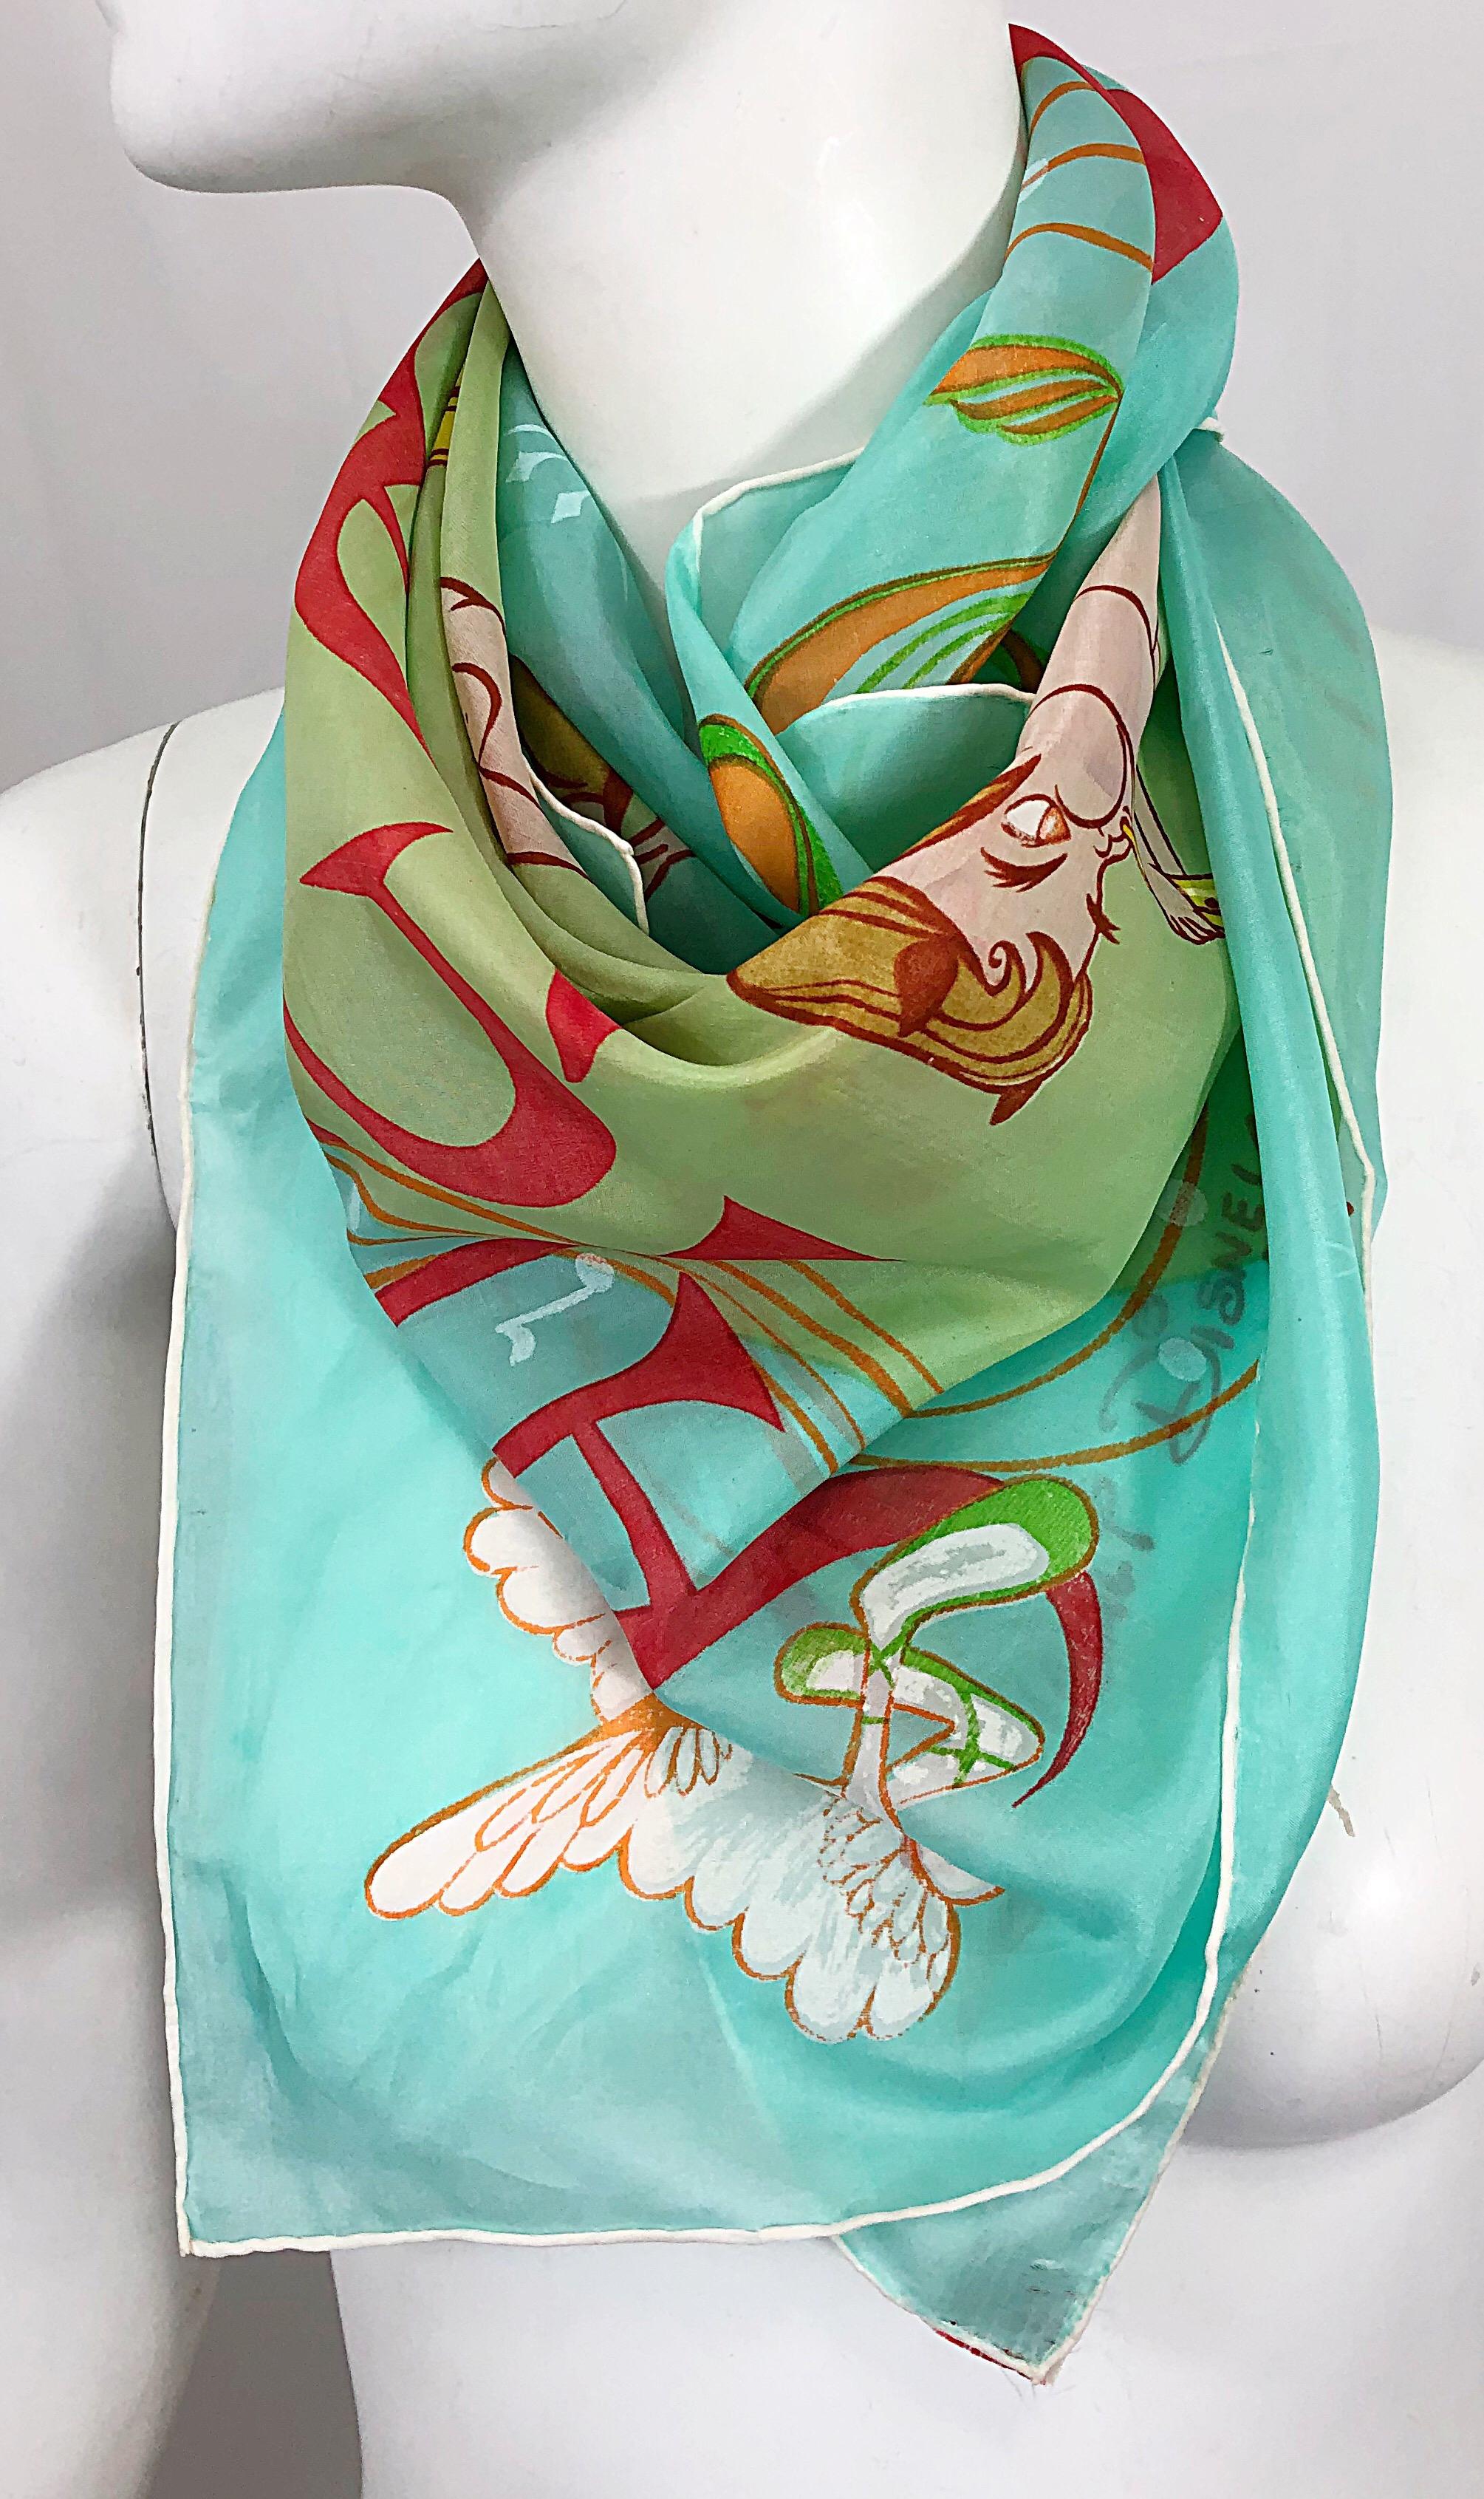 Rare and collectible 1940s FANTASIA Disney cartoon print silk and rayon scarf! Features the signature cartoon characters from the tale, including centaur, a stork and other characters. Hand rolled edges. Perfectly wearable or framed. Can be worn